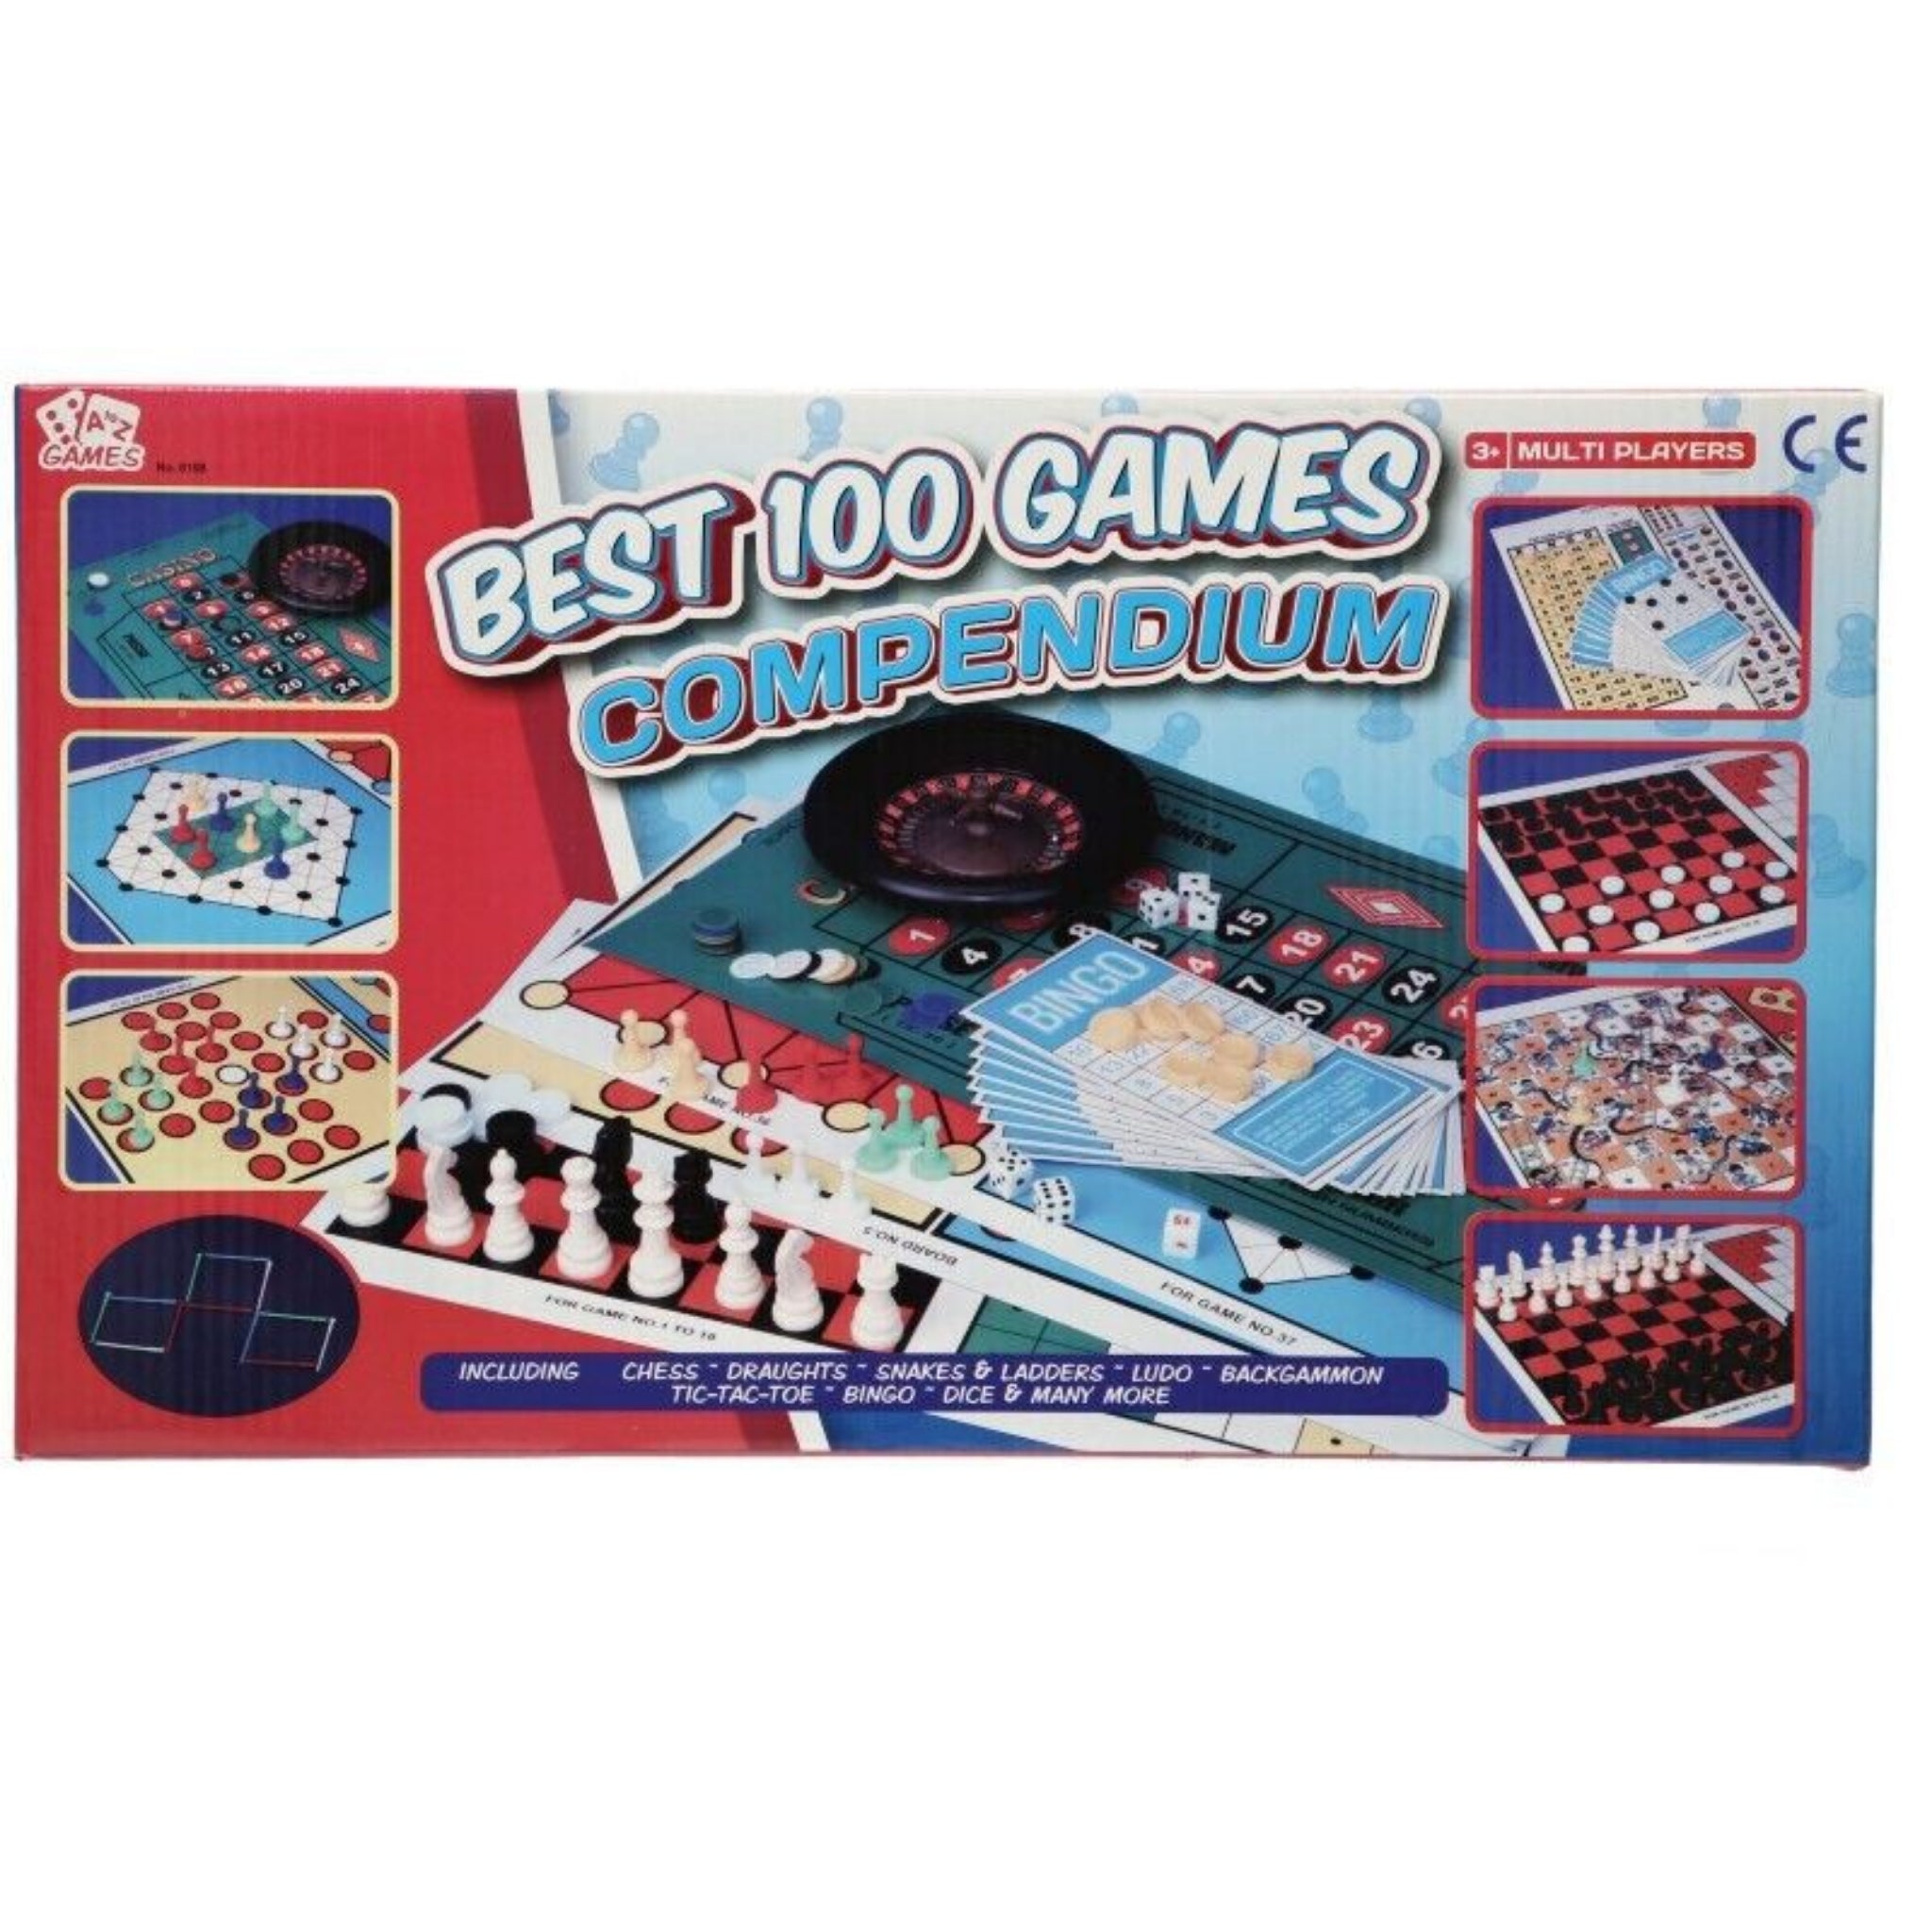 Beclen Harp Traditional Board Games Includes Snakes And Ladders/Ludo/Chess/Draughts/Tic Tac Toe/Bingo